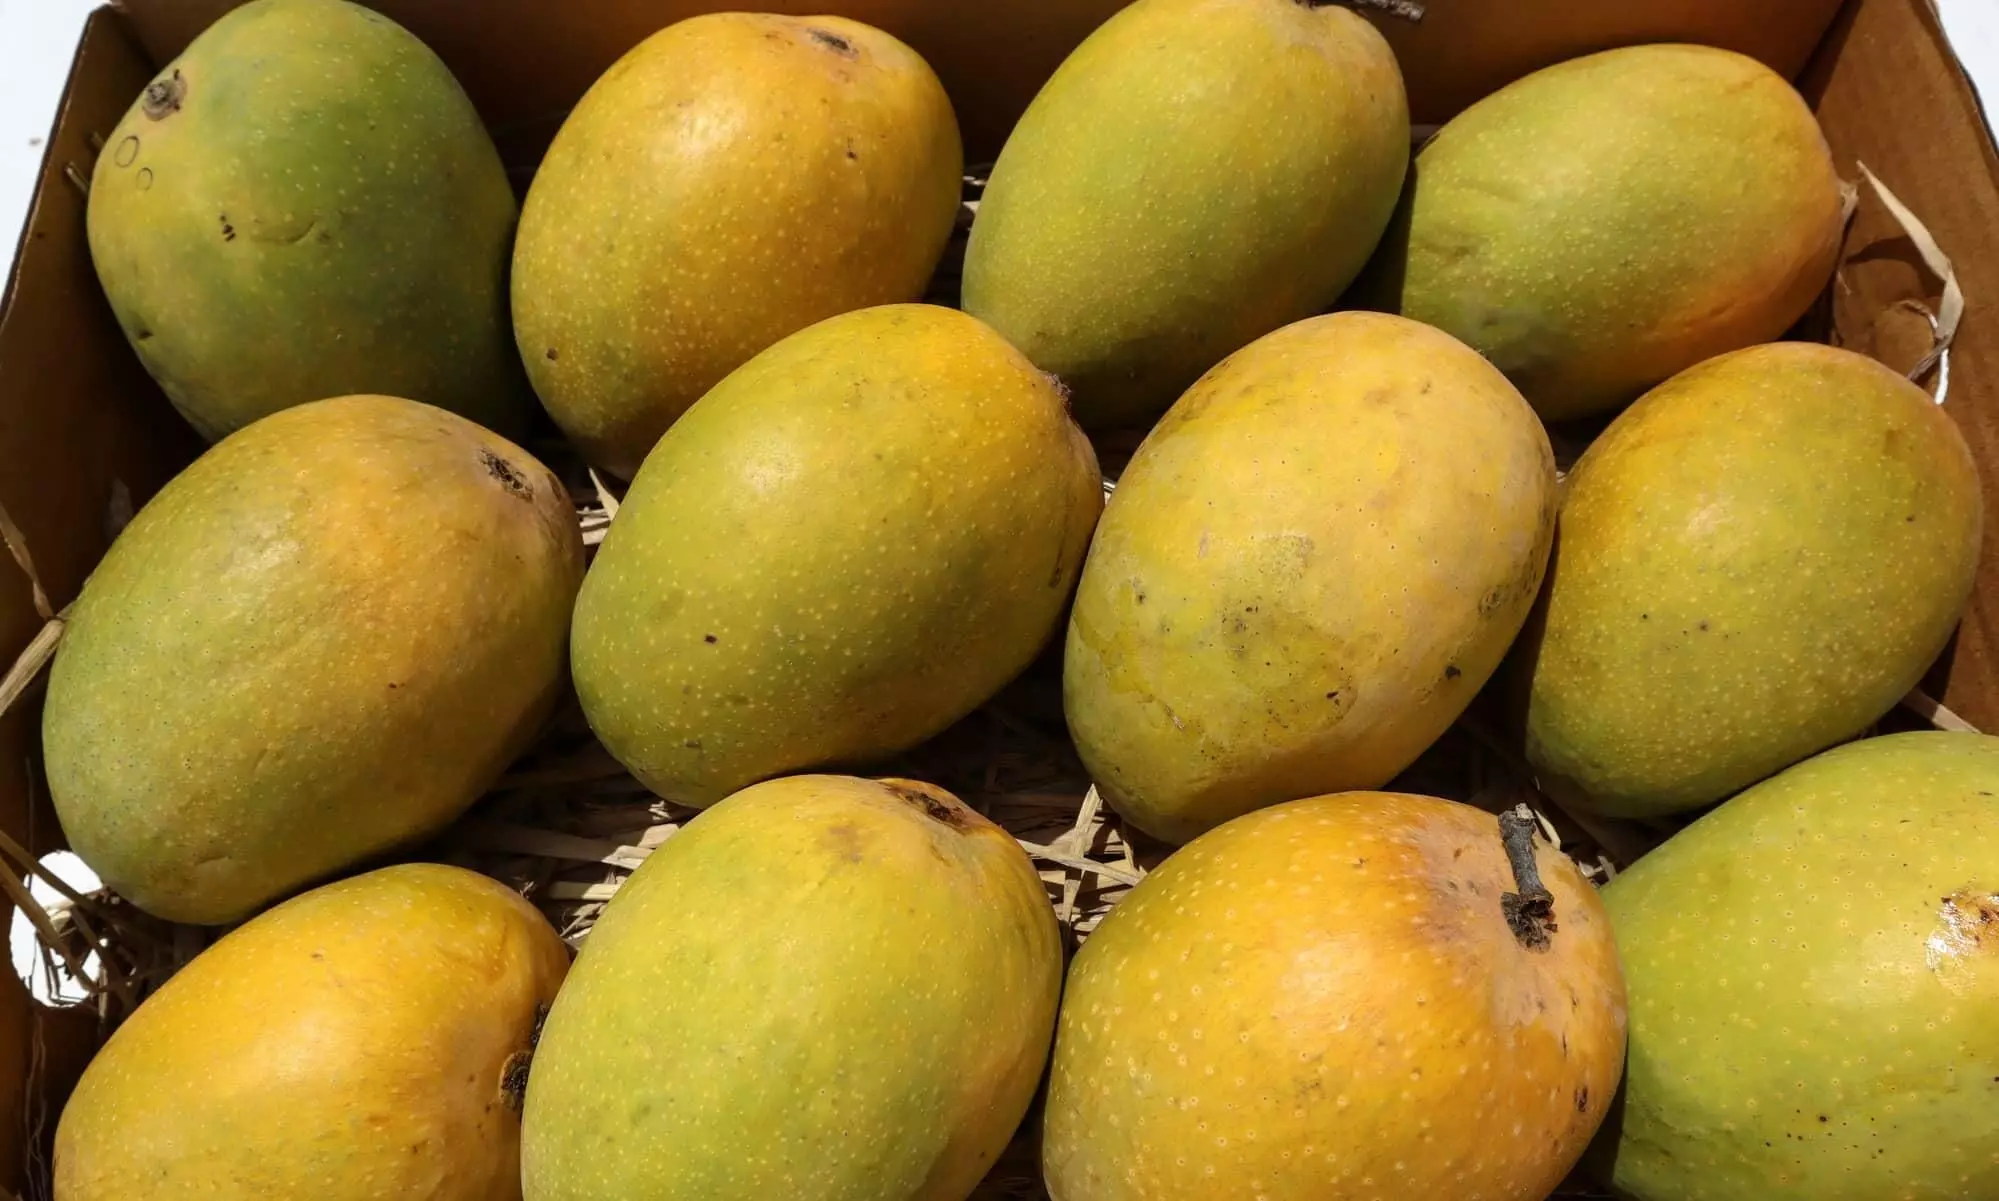 BLR Airport reports 124% surge in mango exports